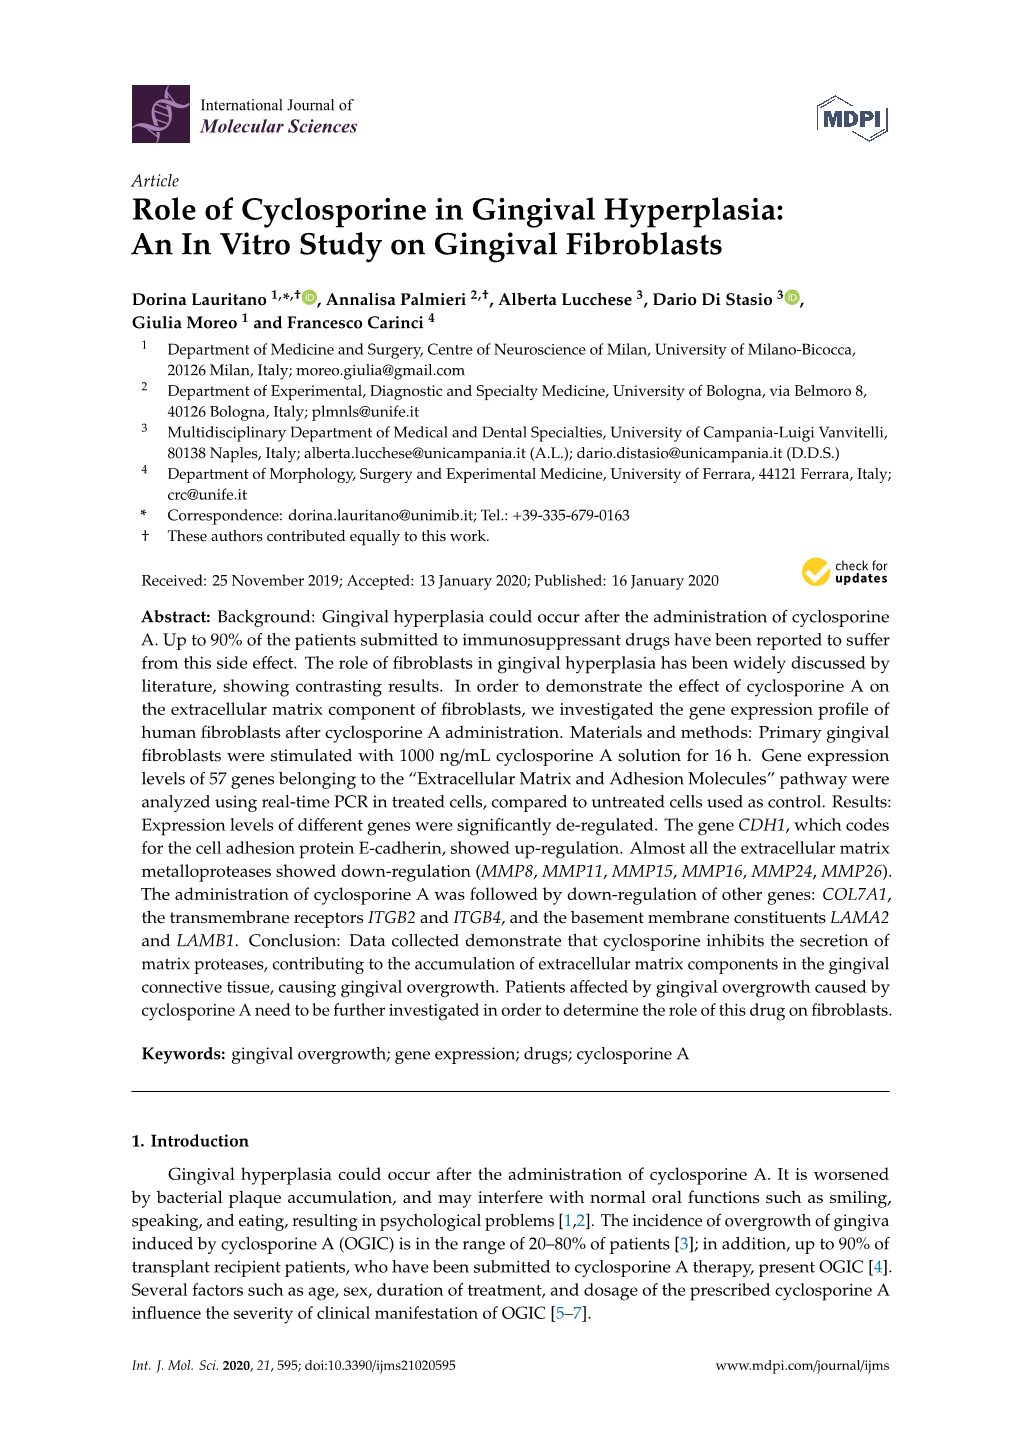 Role of Cyclosporine in Gingival Hyperplasia: an in Vitro Study on Gingival Fibroblasts